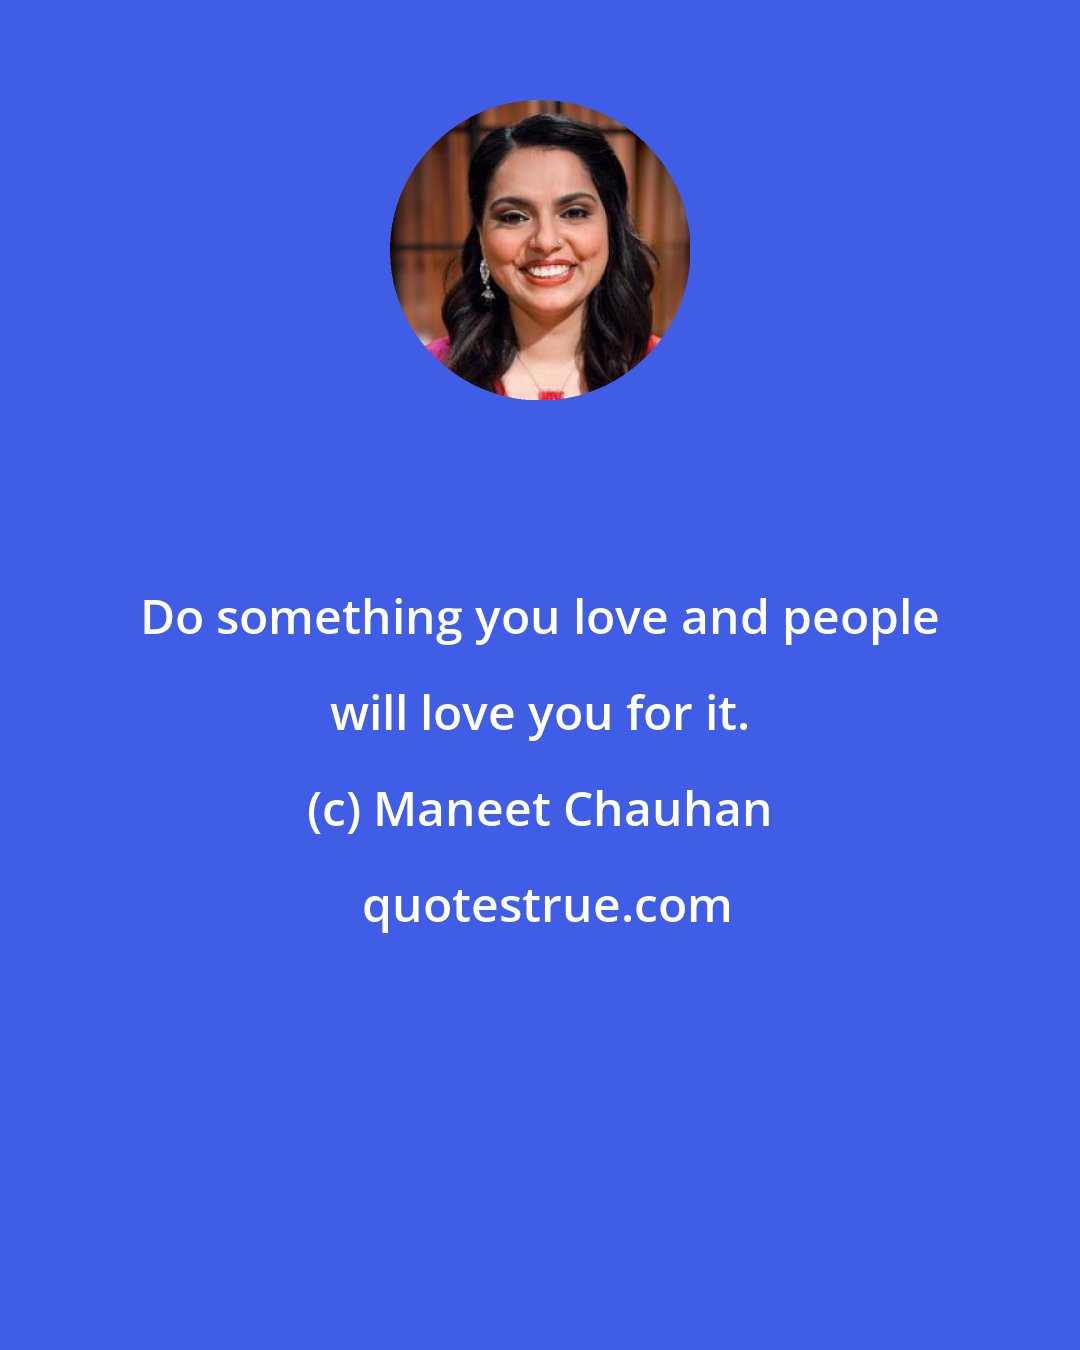 Maneet Chauhan: Do something you love and people will love you for it.